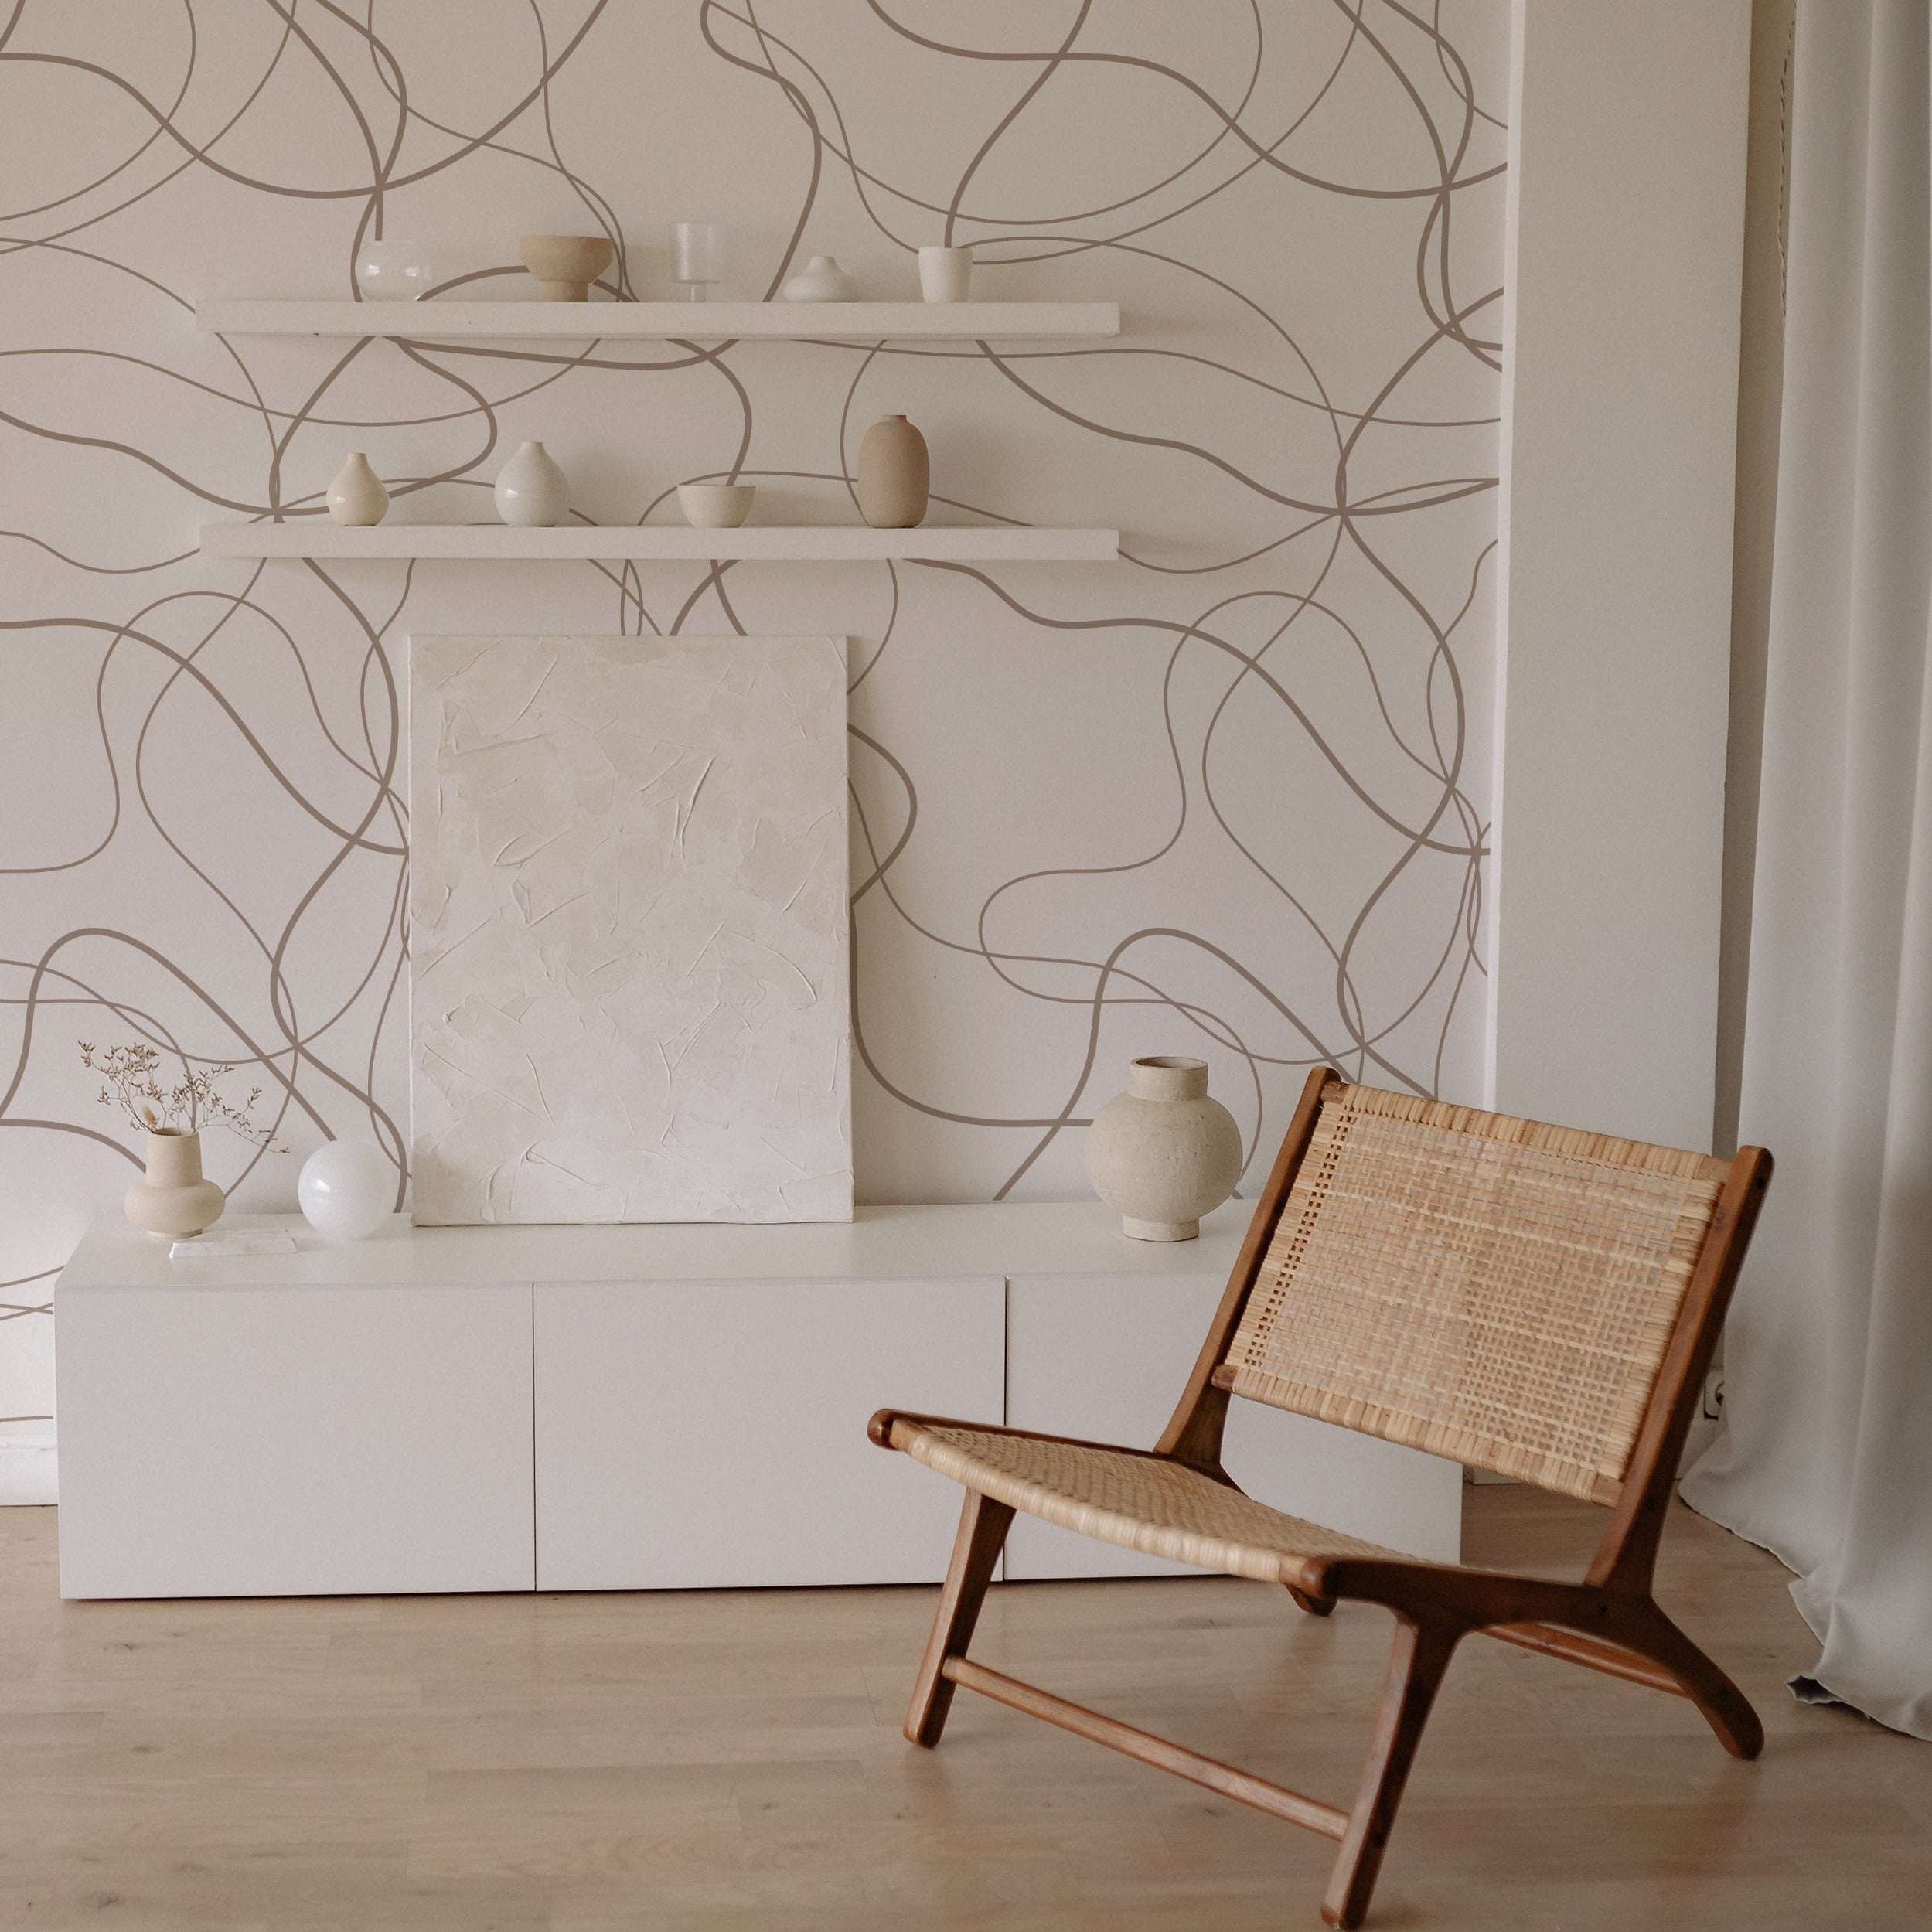 A modern minimalist living area with 'Organic Doodle Wallpaper III' adorning the wall, its free-form doodle lines creating a relaxed and creative atmosphere, complemented by simple decor